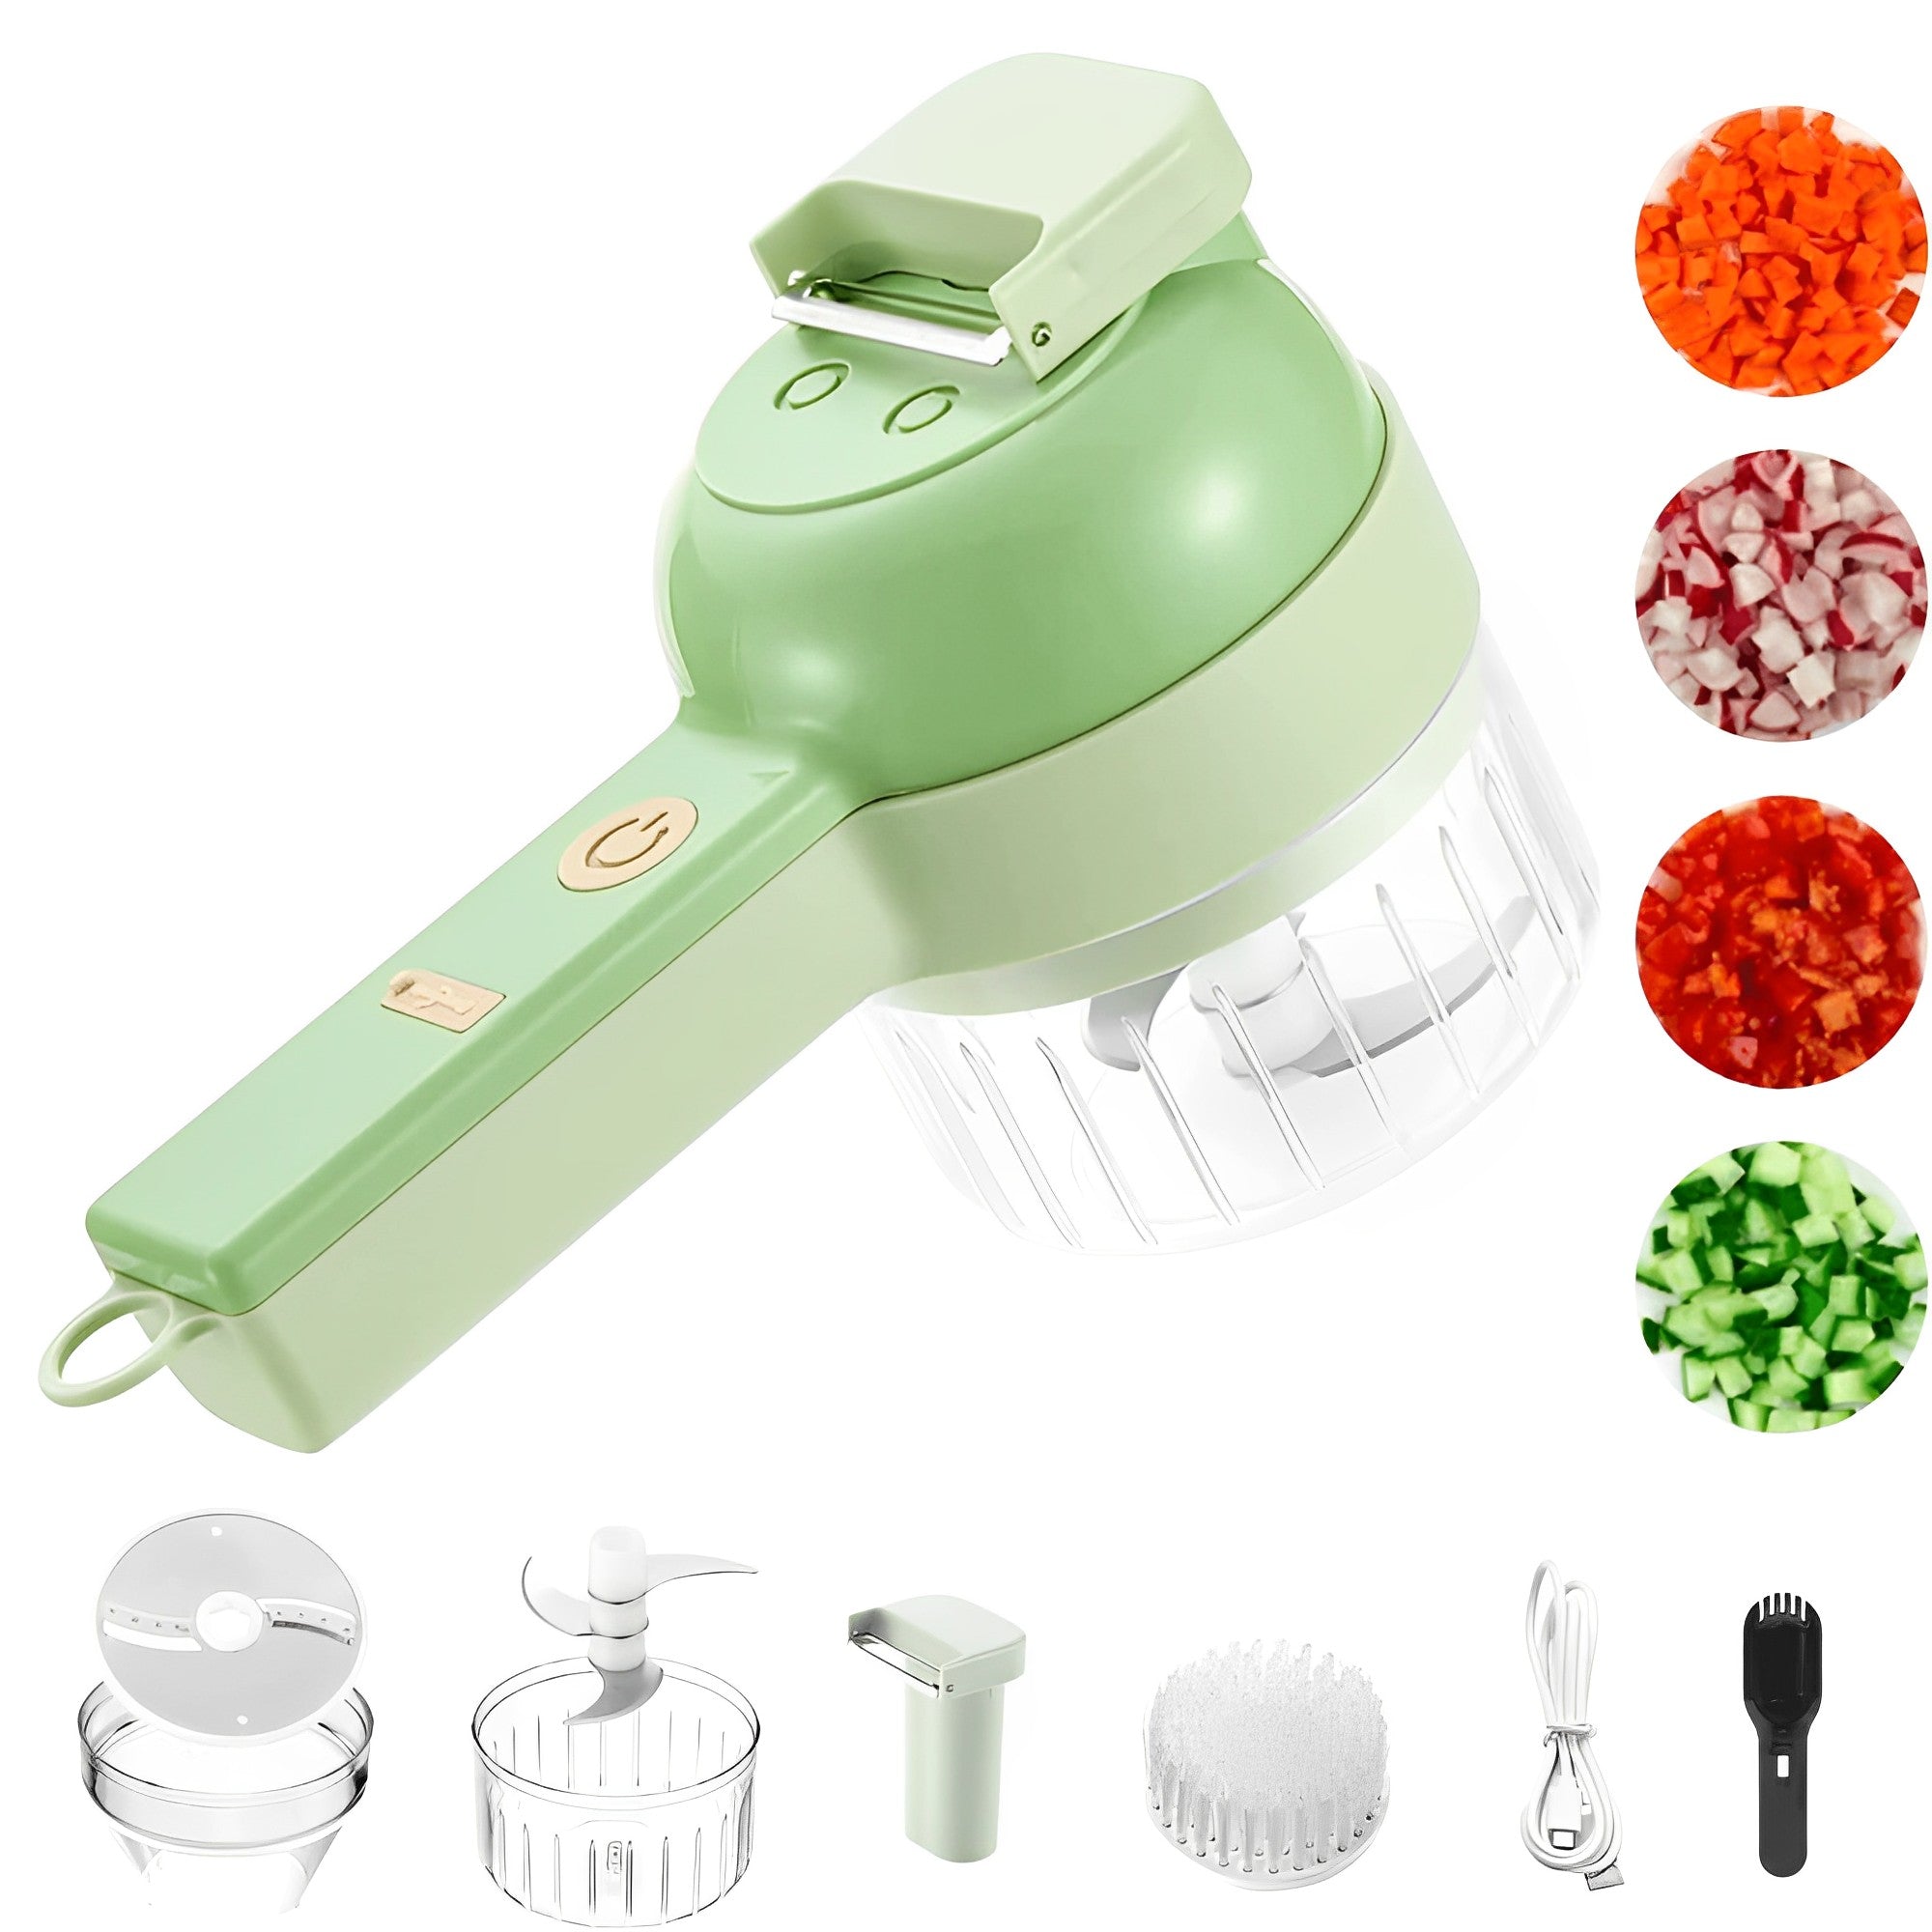  SOKO Commercial Electric Vegetable Slicer Cutter, 0